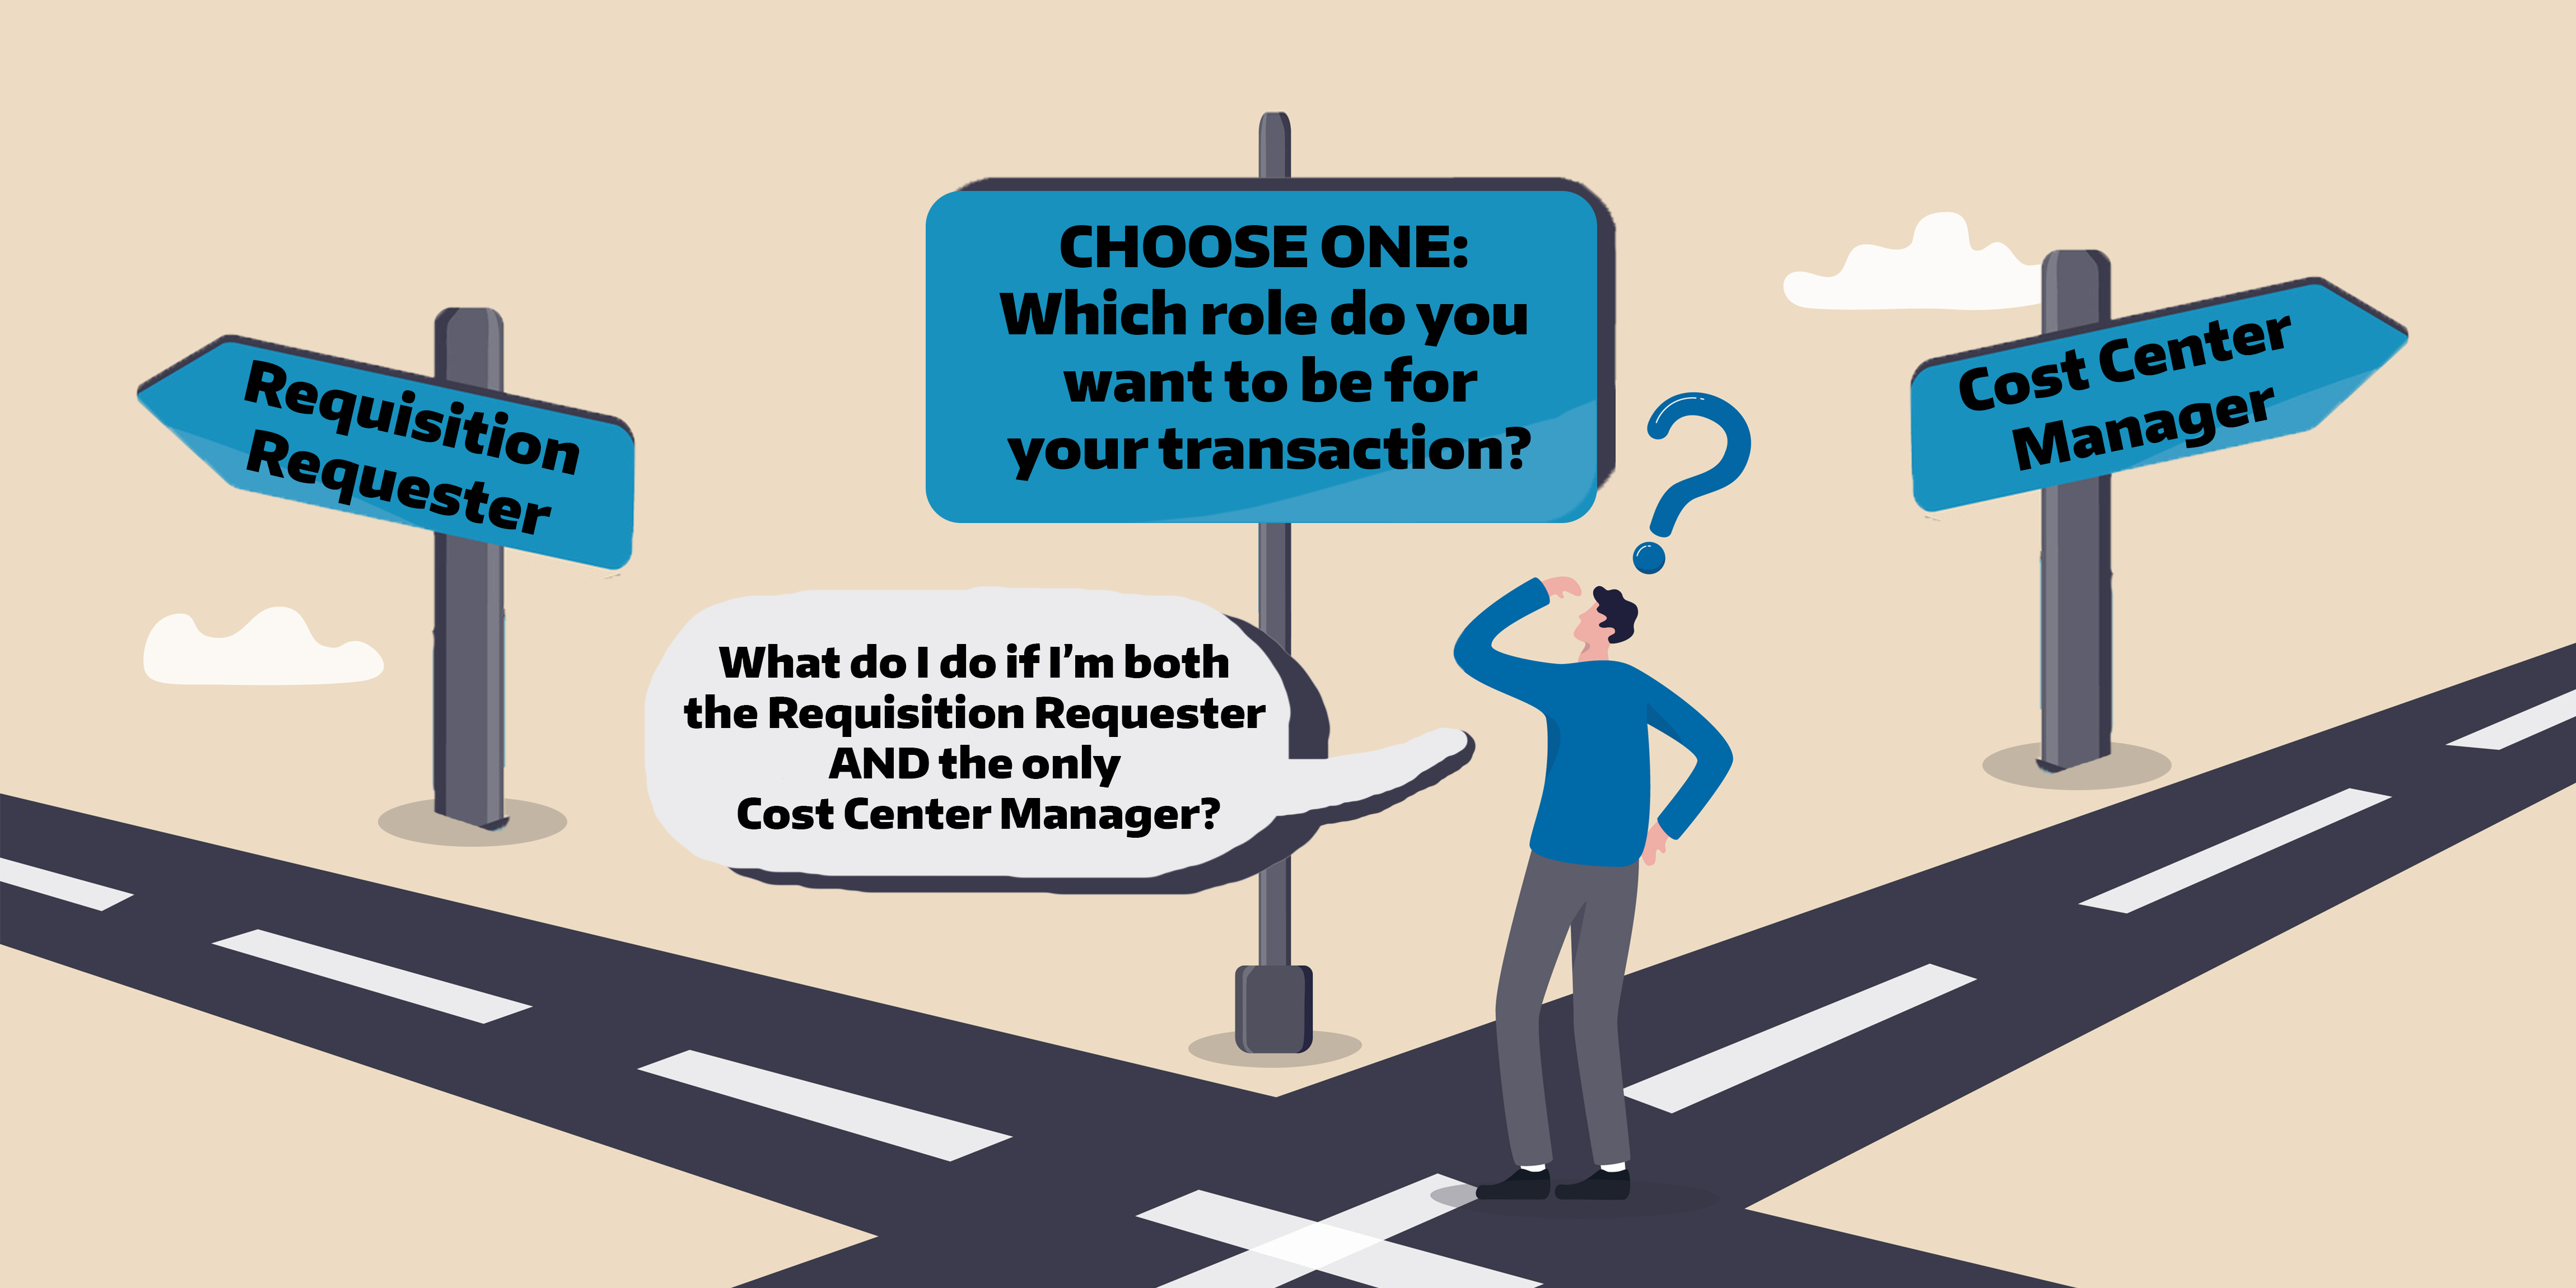 A person standing at a crossroads reading a sign that says, "CHOOSE ONE: Which role do you want to be for your transaction?" To the left is the path for requisition requesters, and to the right is the path for cost center managers. The person says, "What do I do if I'm both the Requisition Requester AND the only Cost Center Manager?"